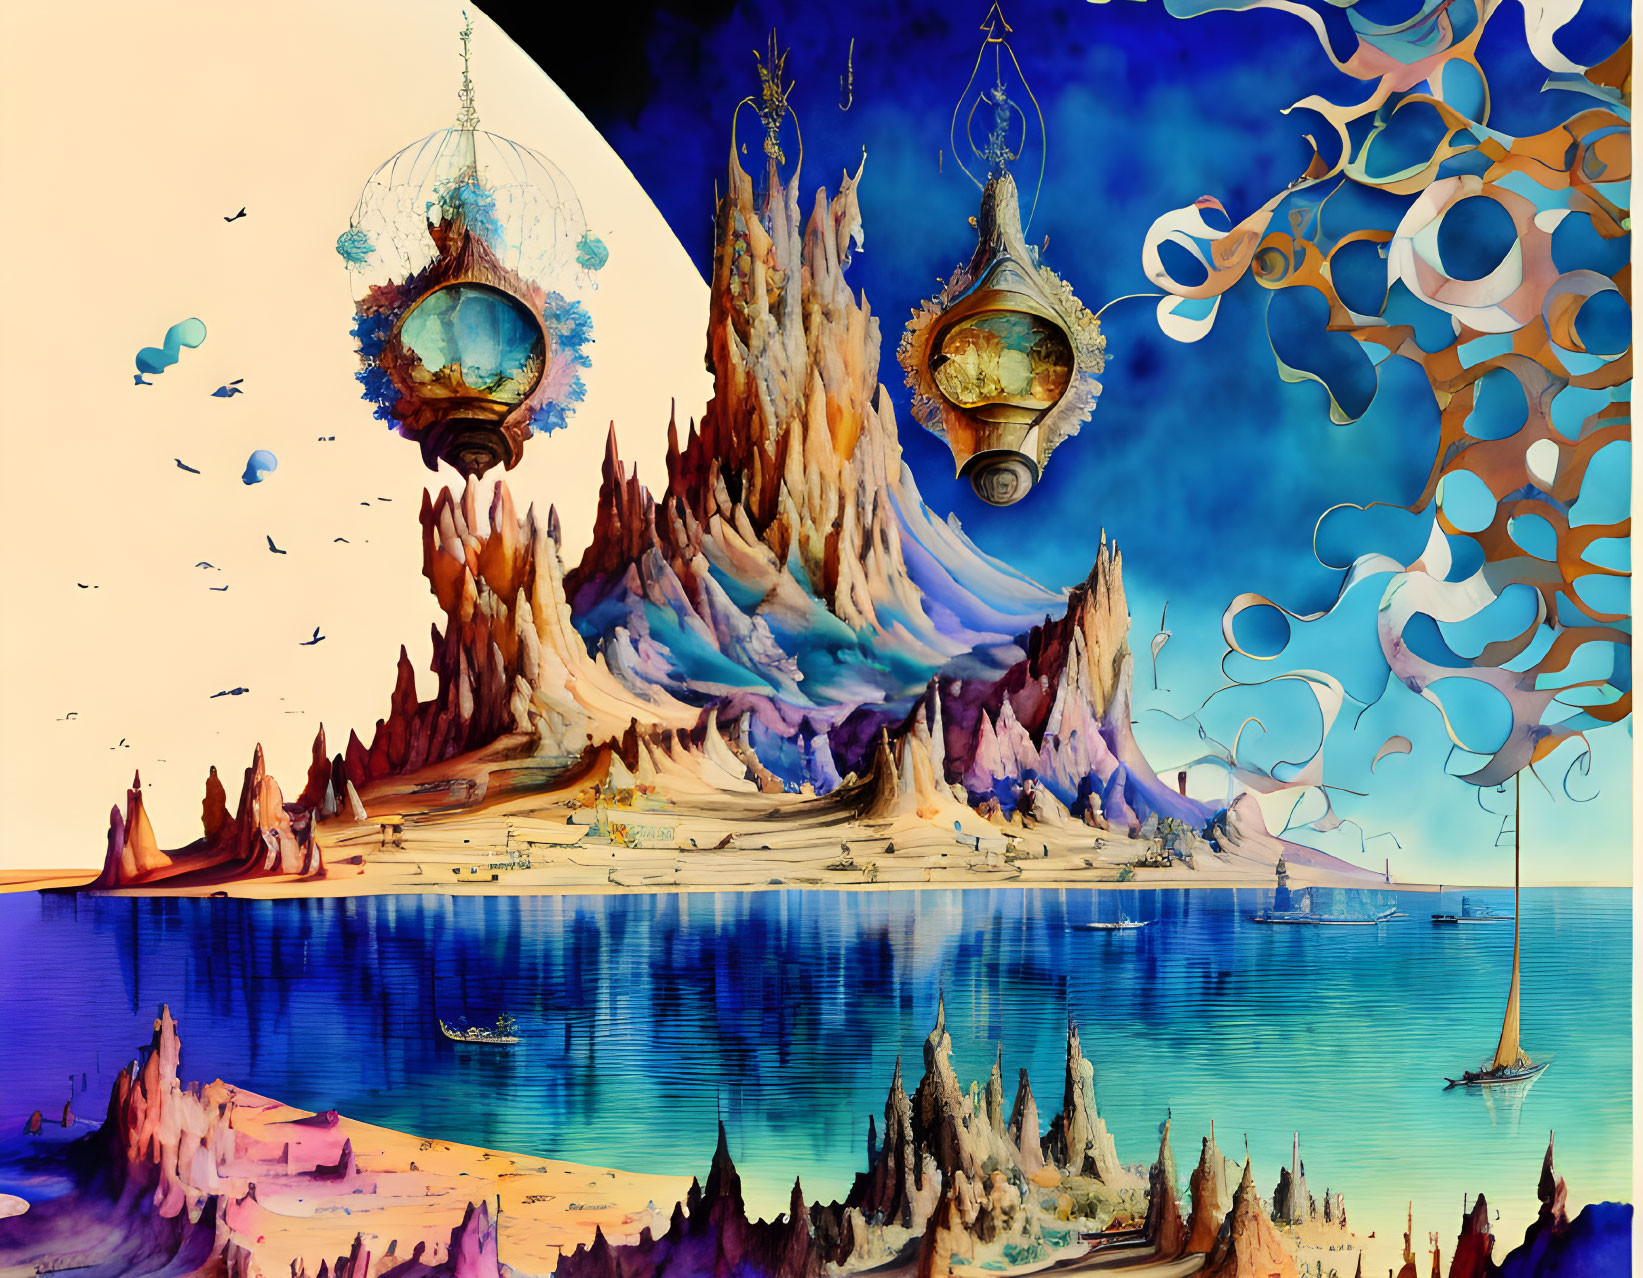 Vibrant mountains, floating islands, and ornate structures above a reflective blue sea